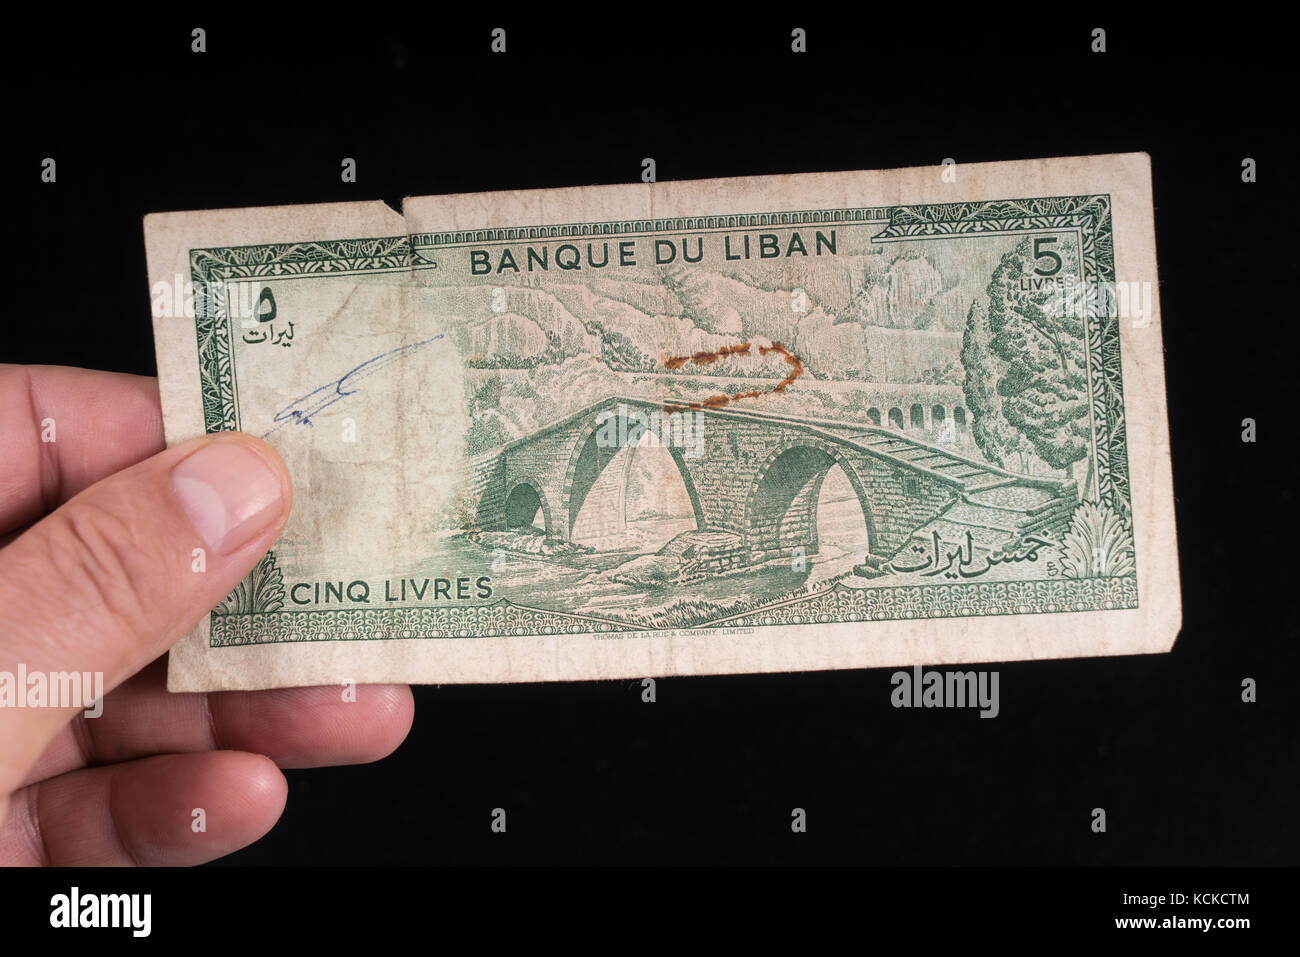 An old Lebanese banknote on hand Stock Photo